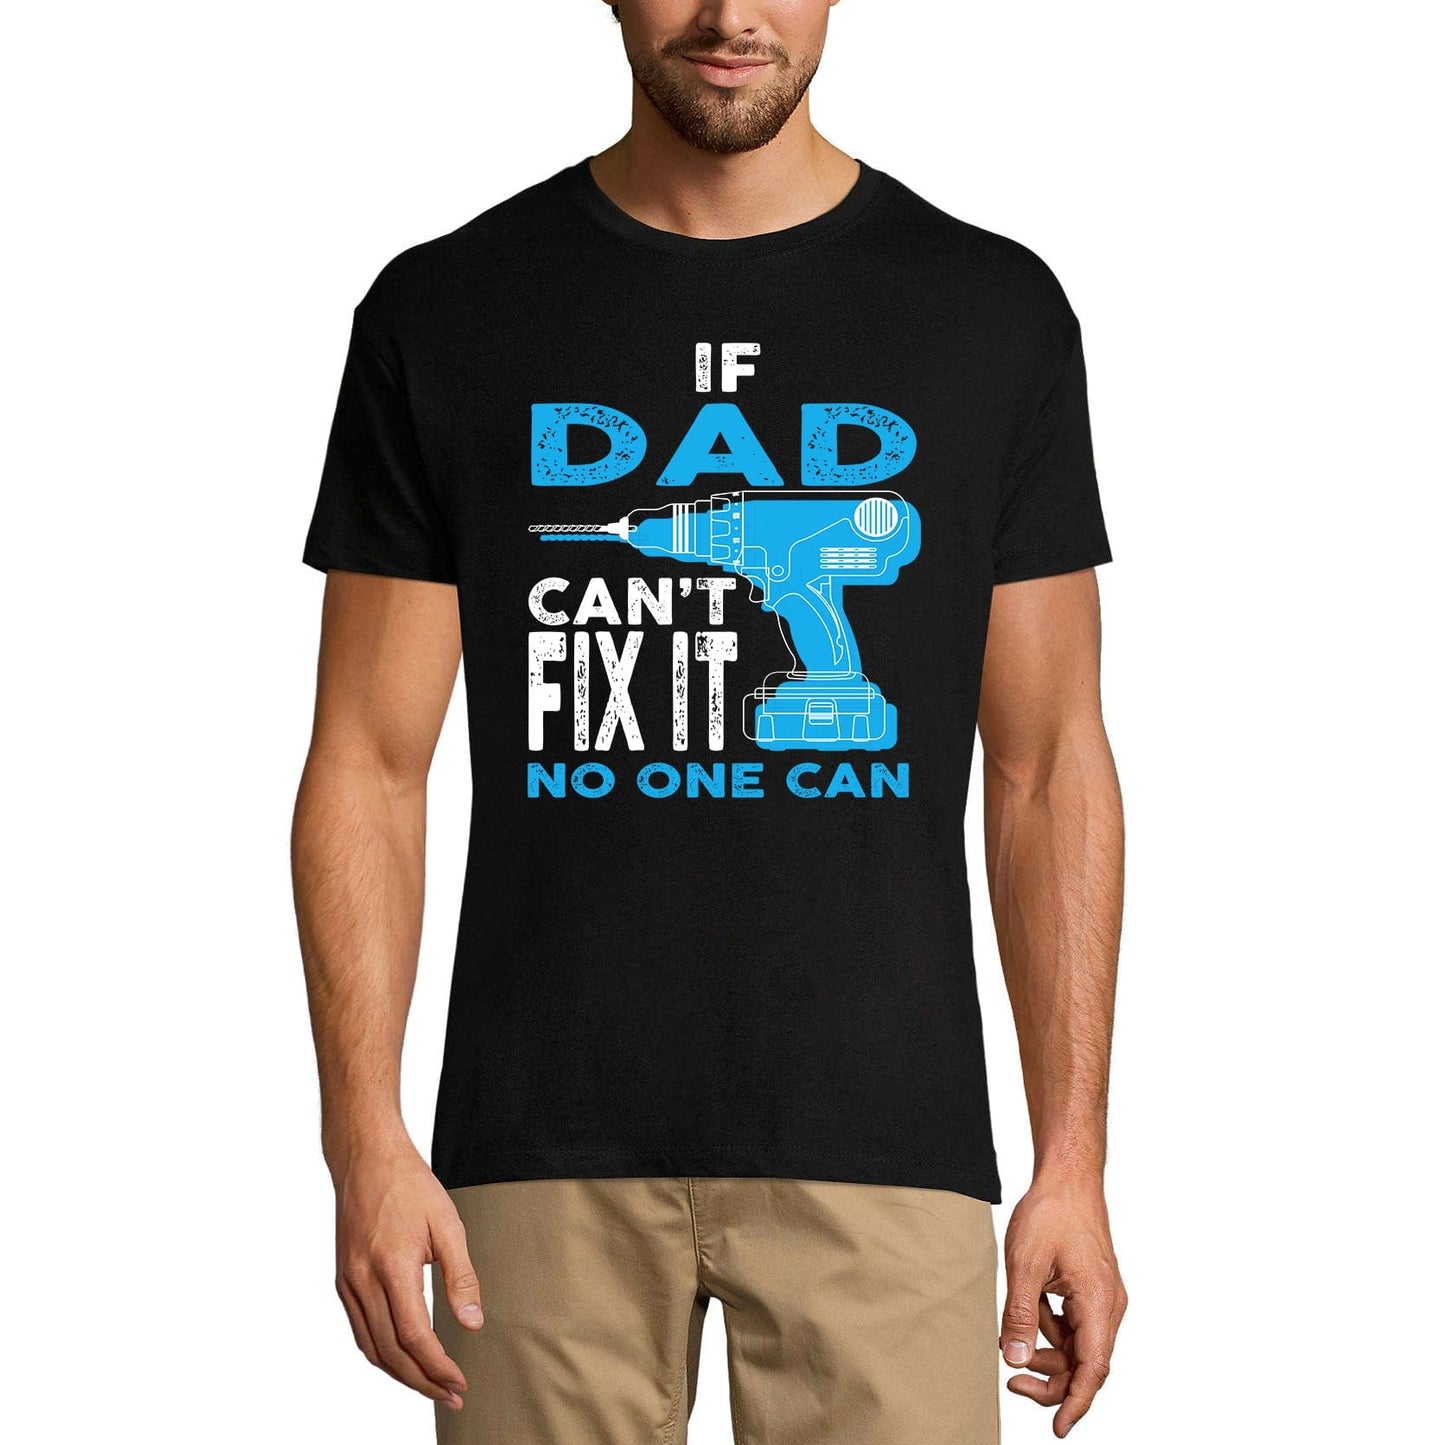 ULTRABASIC Men's Novelty T-Shirt If Dad Can't Fix It No One Can Tee Shirt